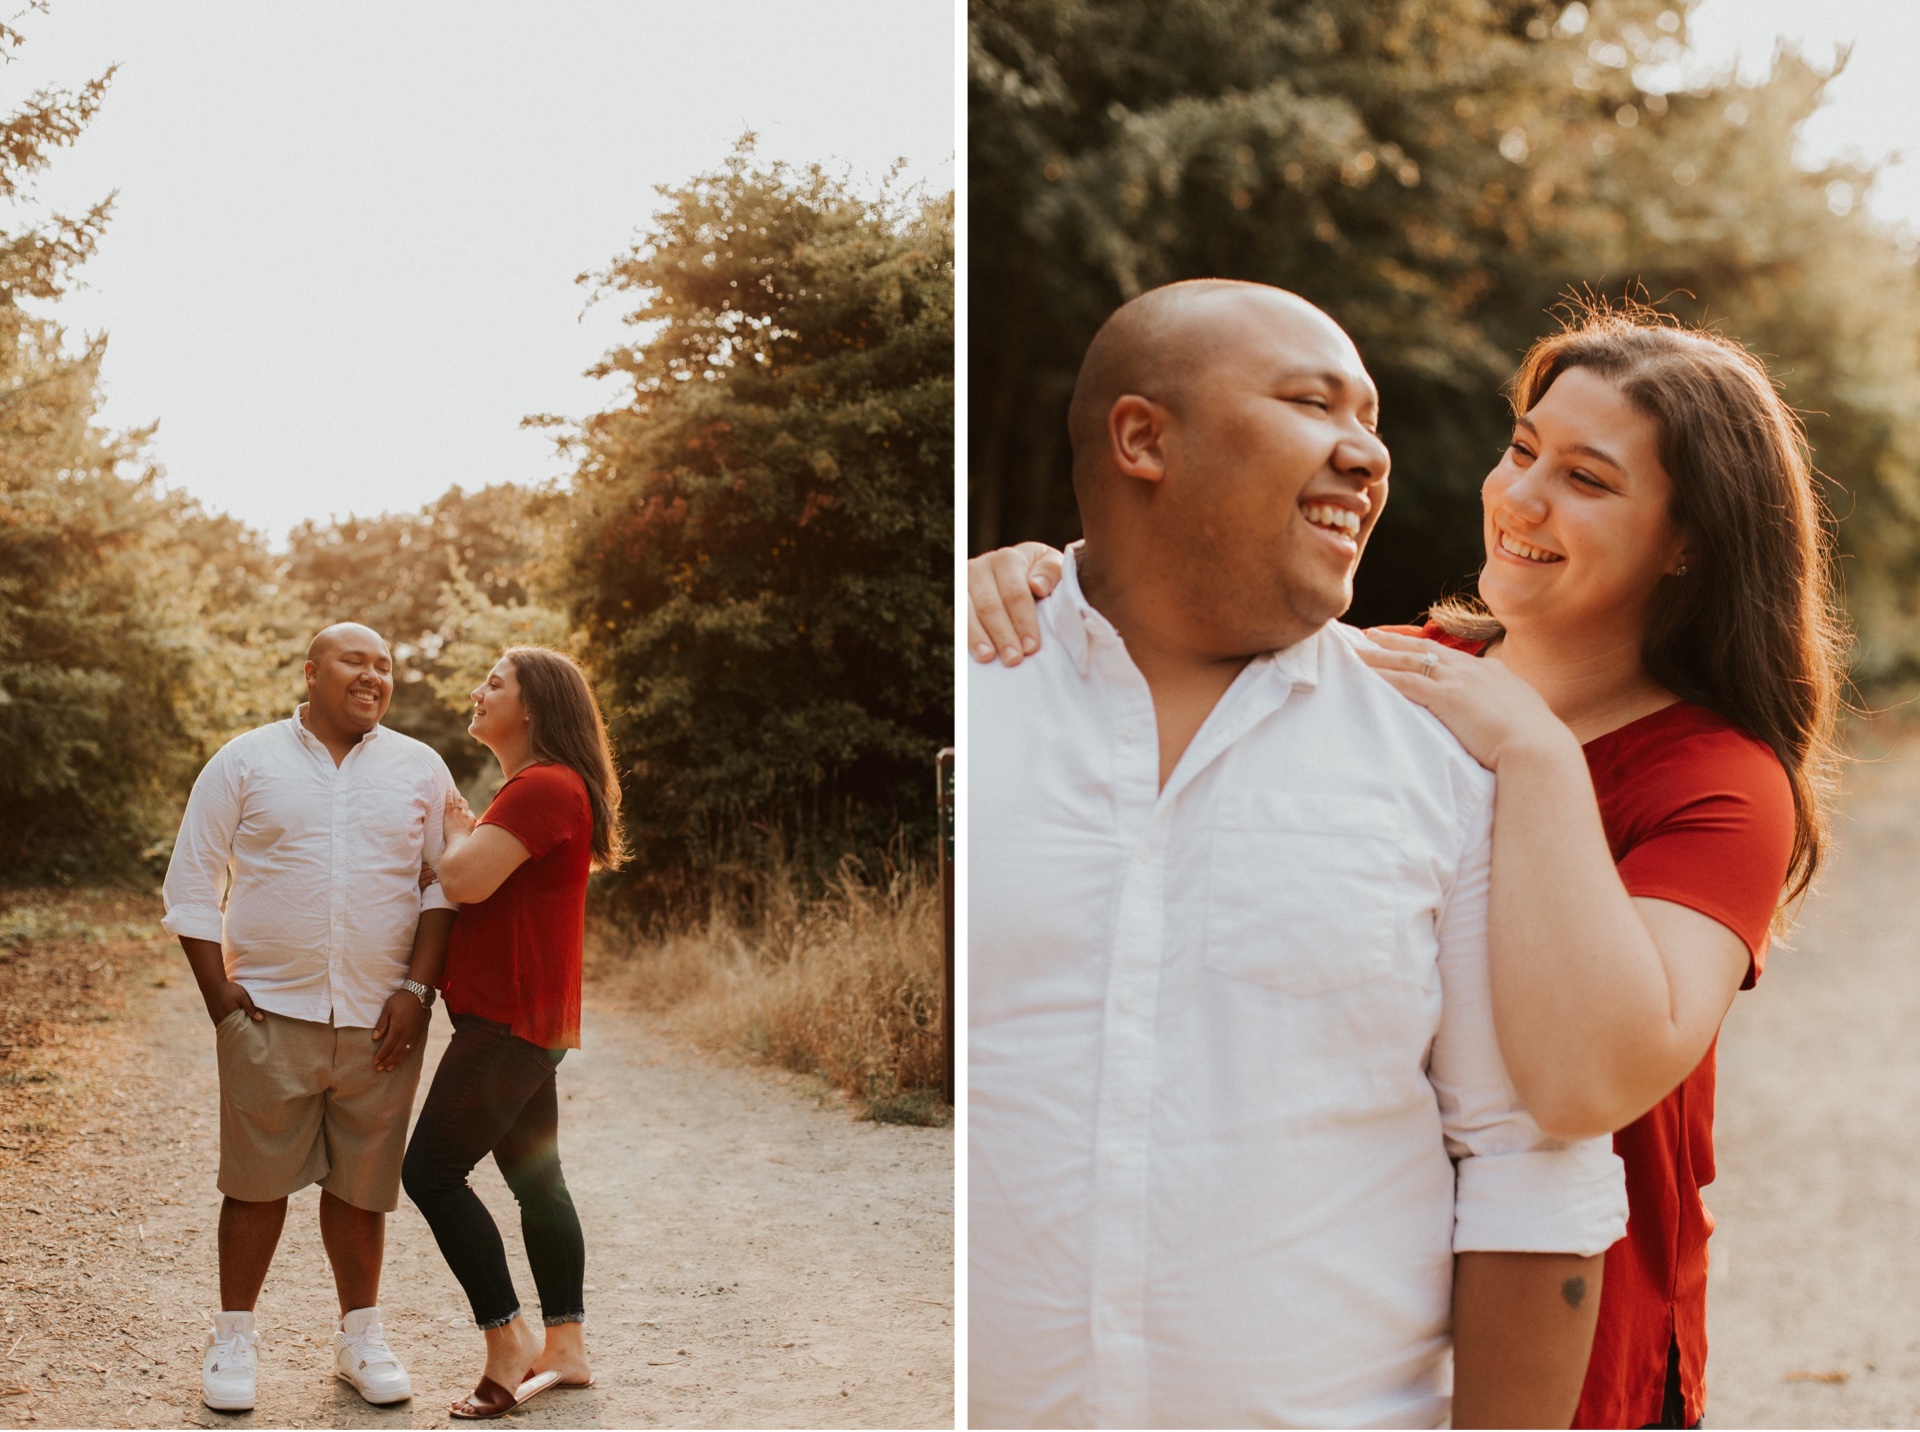 Engagement Session at Discovery park by Sarah Anne Photography